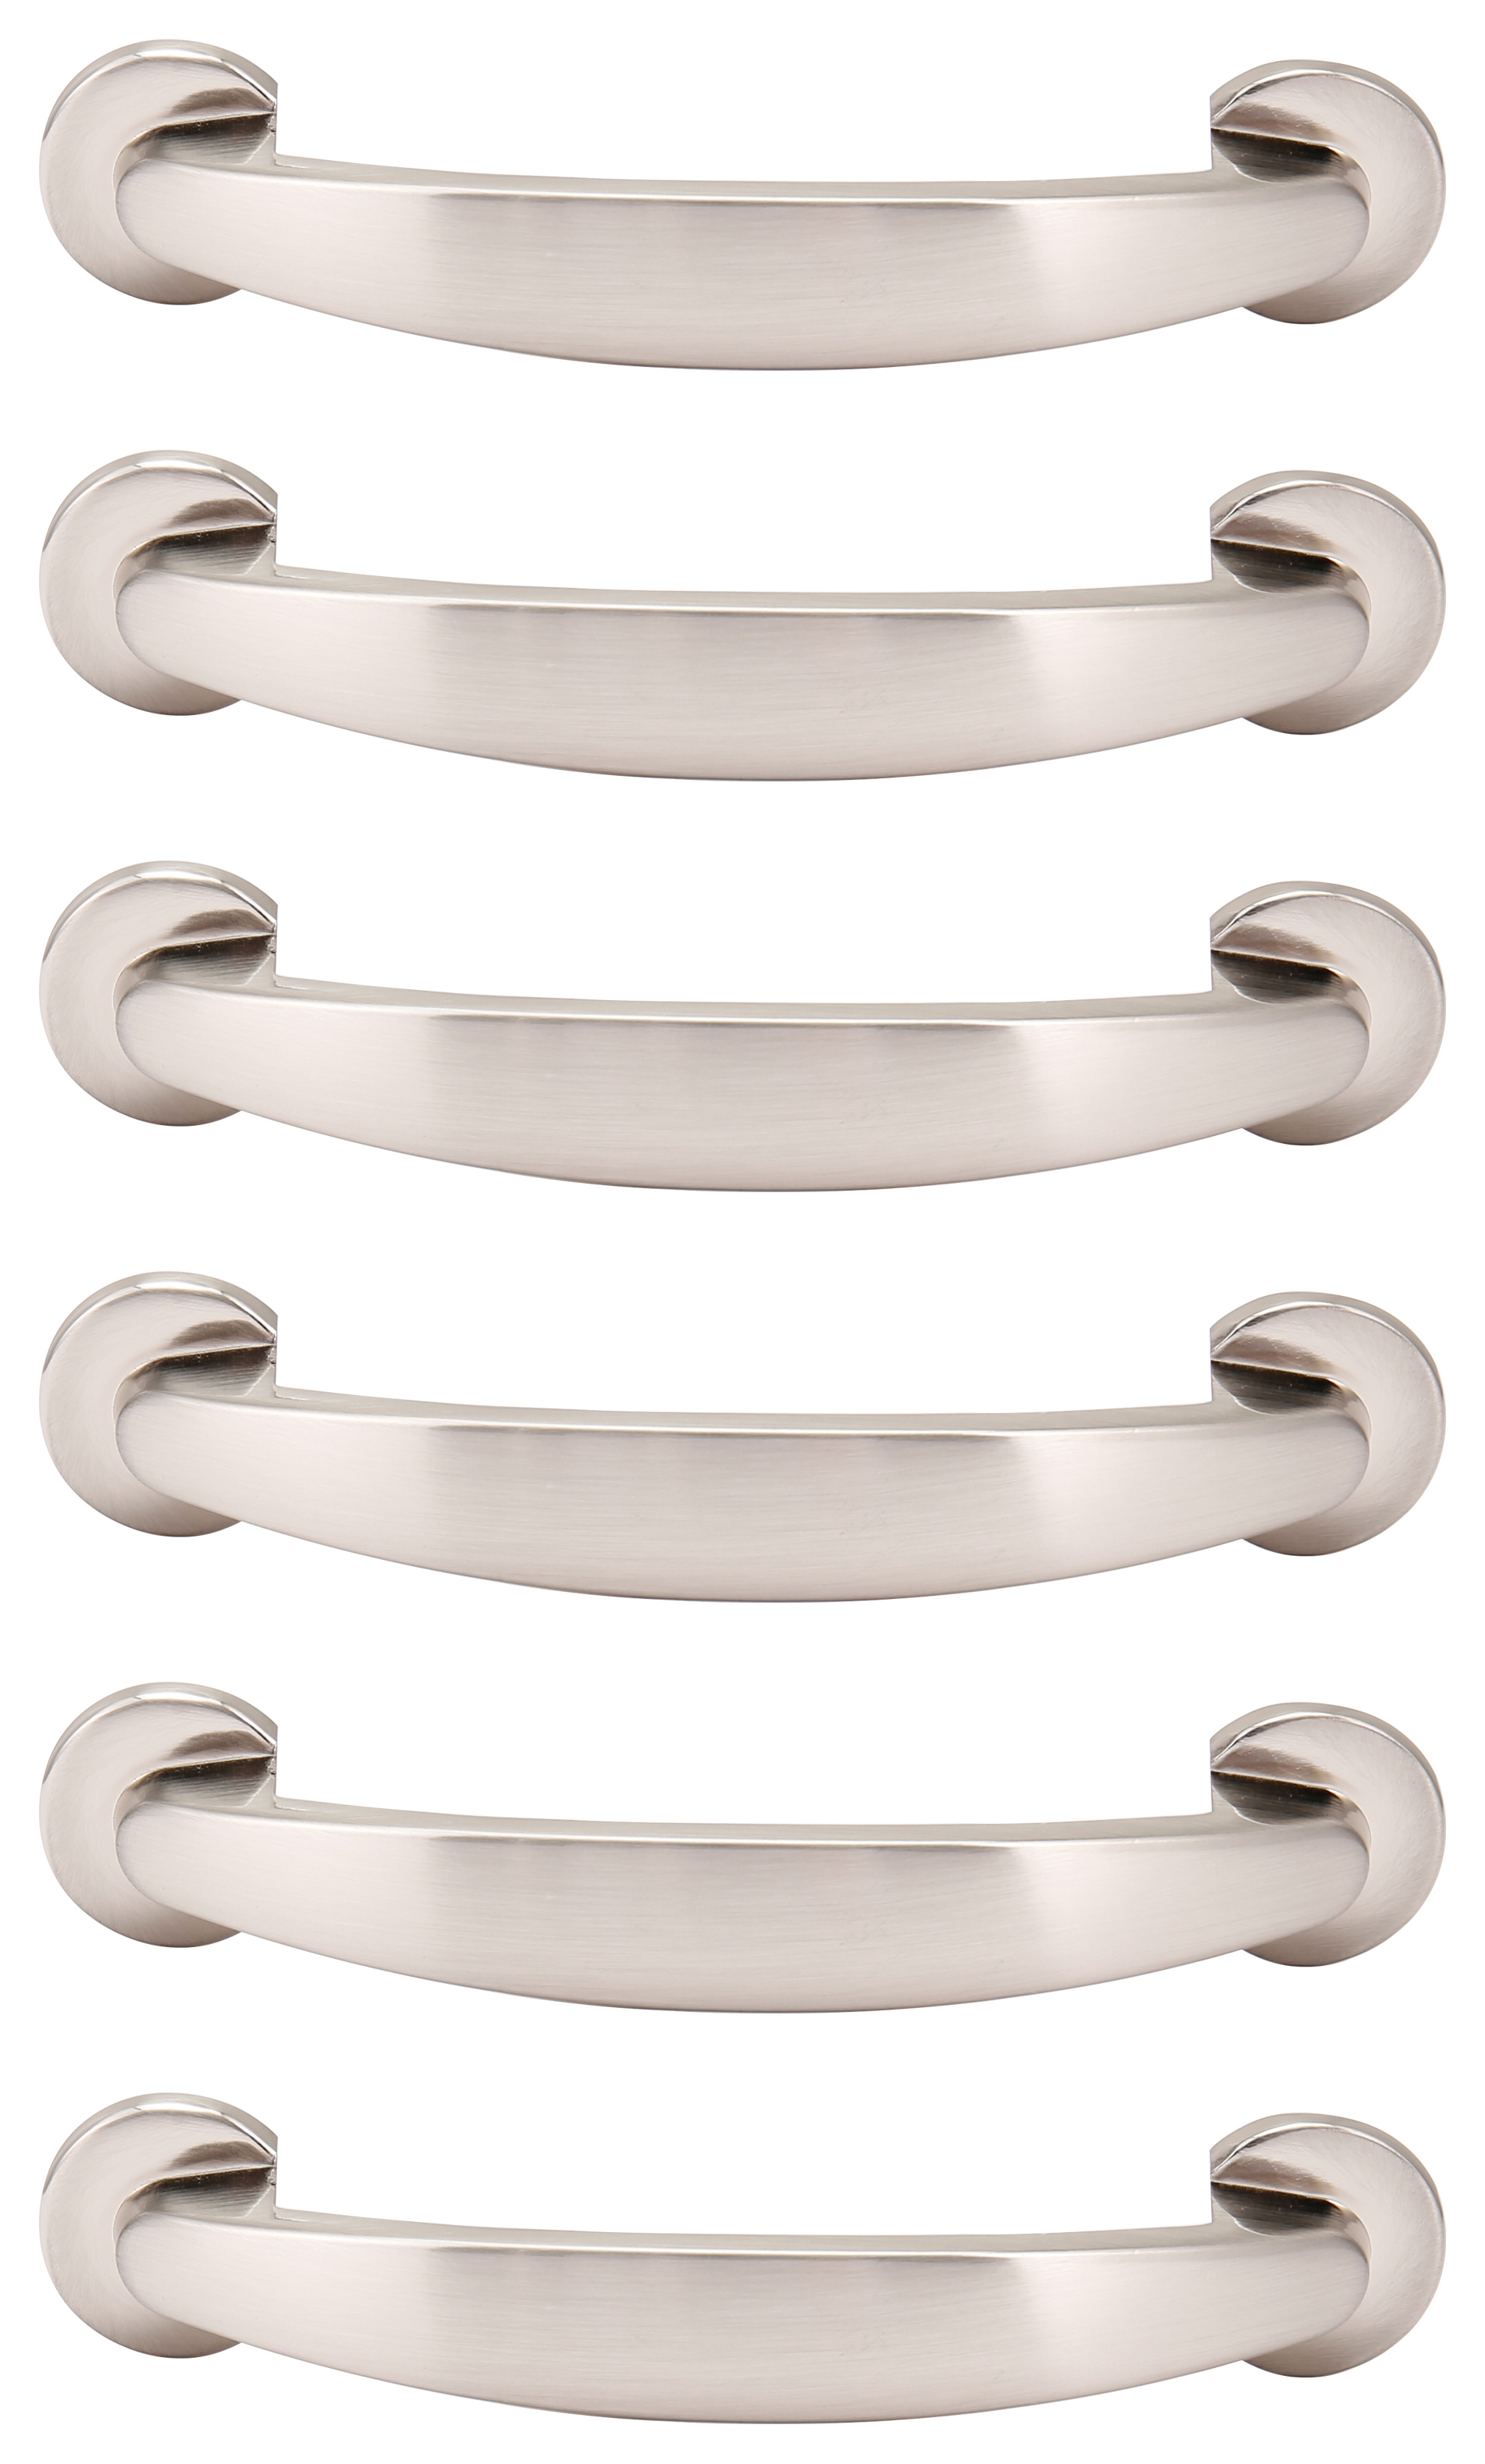 Round Bow Brushed Nickel Cabinet Handle - 120mm - Pack of 6